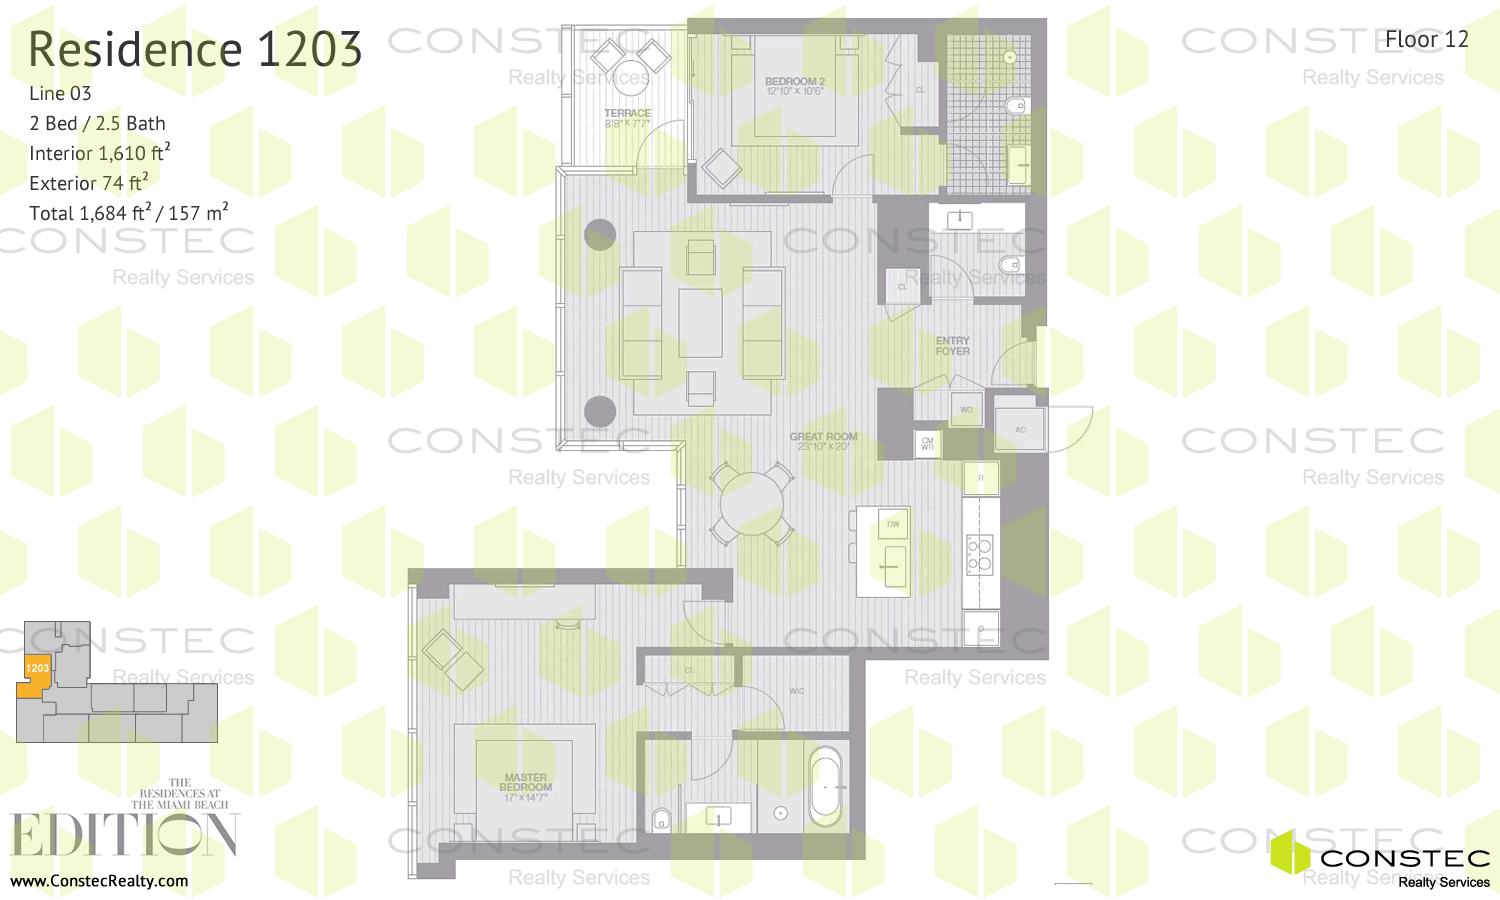 the residences at the miami beach edition floor plans